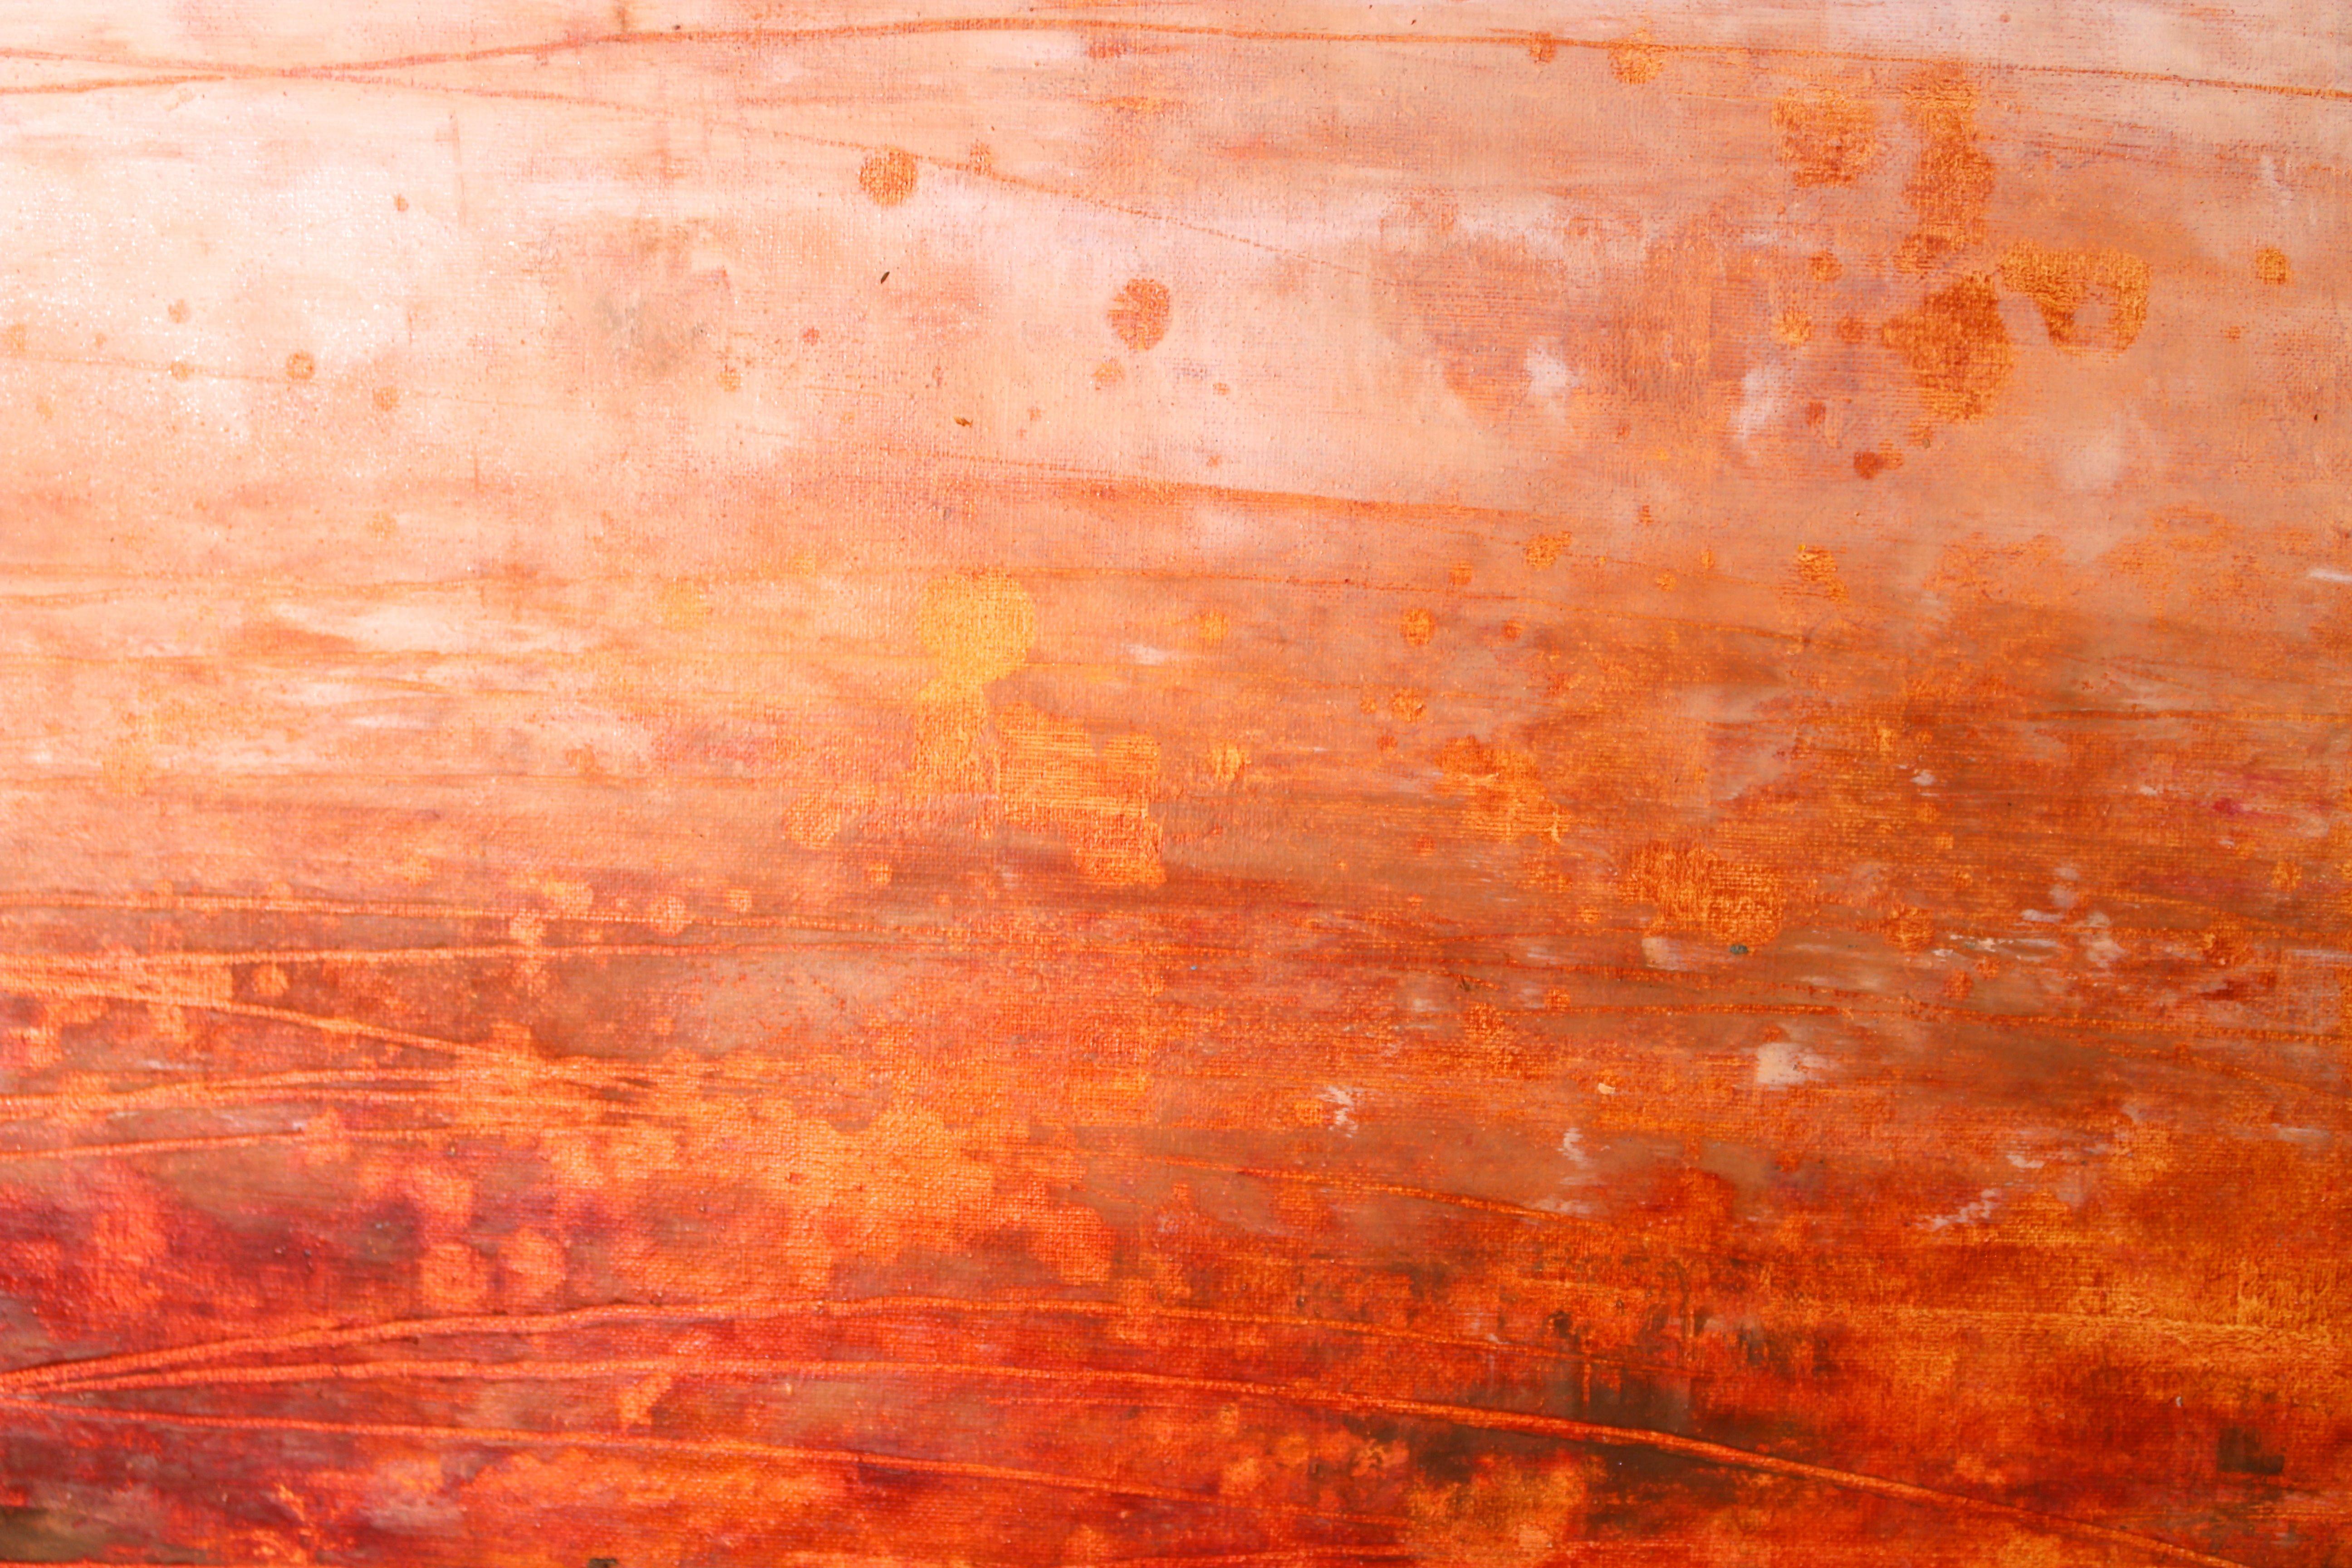 Fields, Painting, Oil on Paper - Orange Abstract Painting by Laura Spring